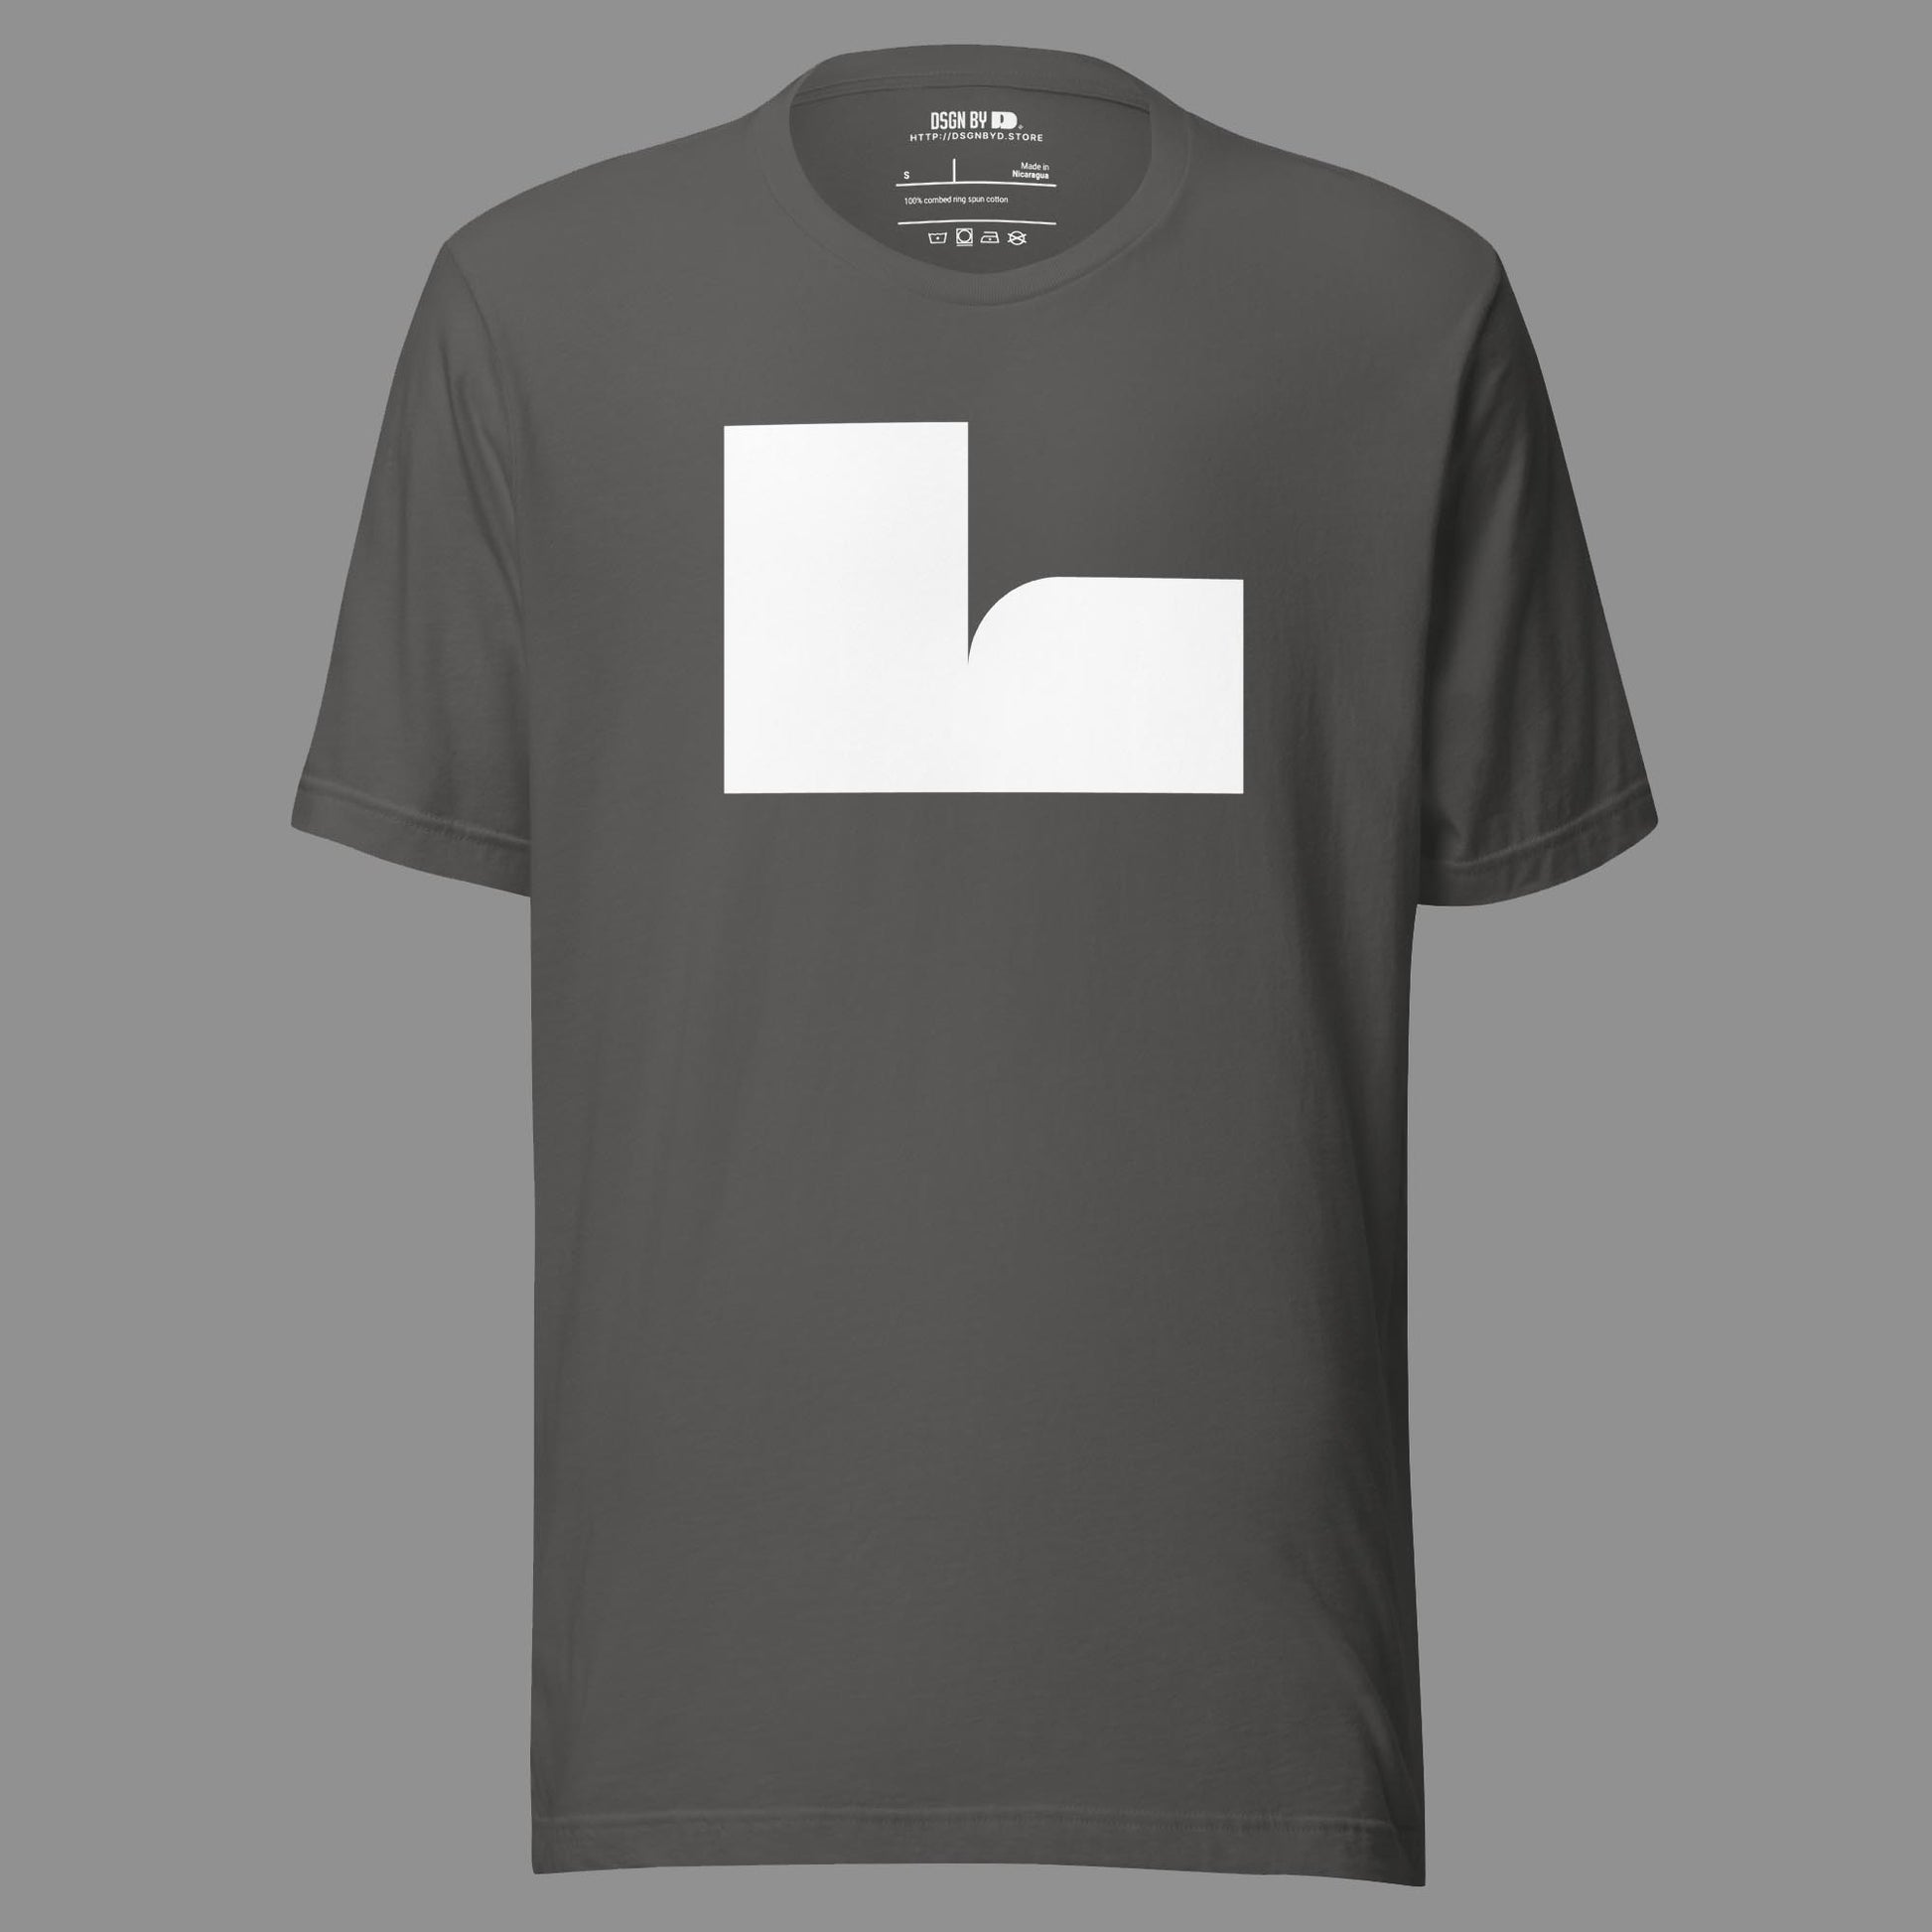 A grey cotton unisex graphic tee with letter L.